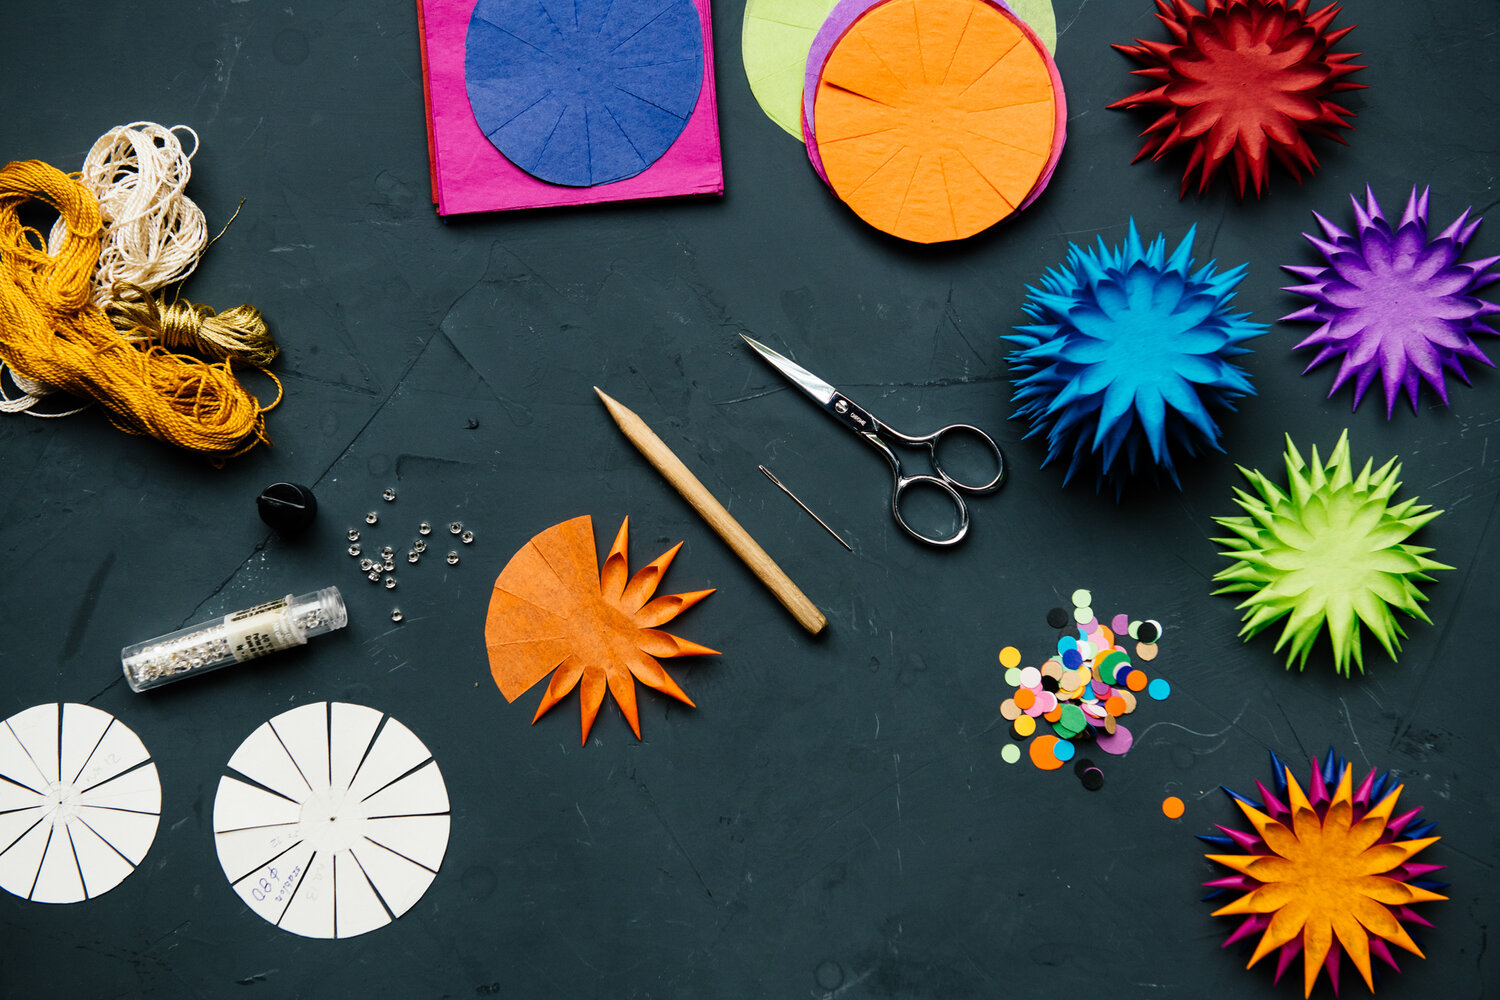 Image of tools and materials used to create paper ornaments.